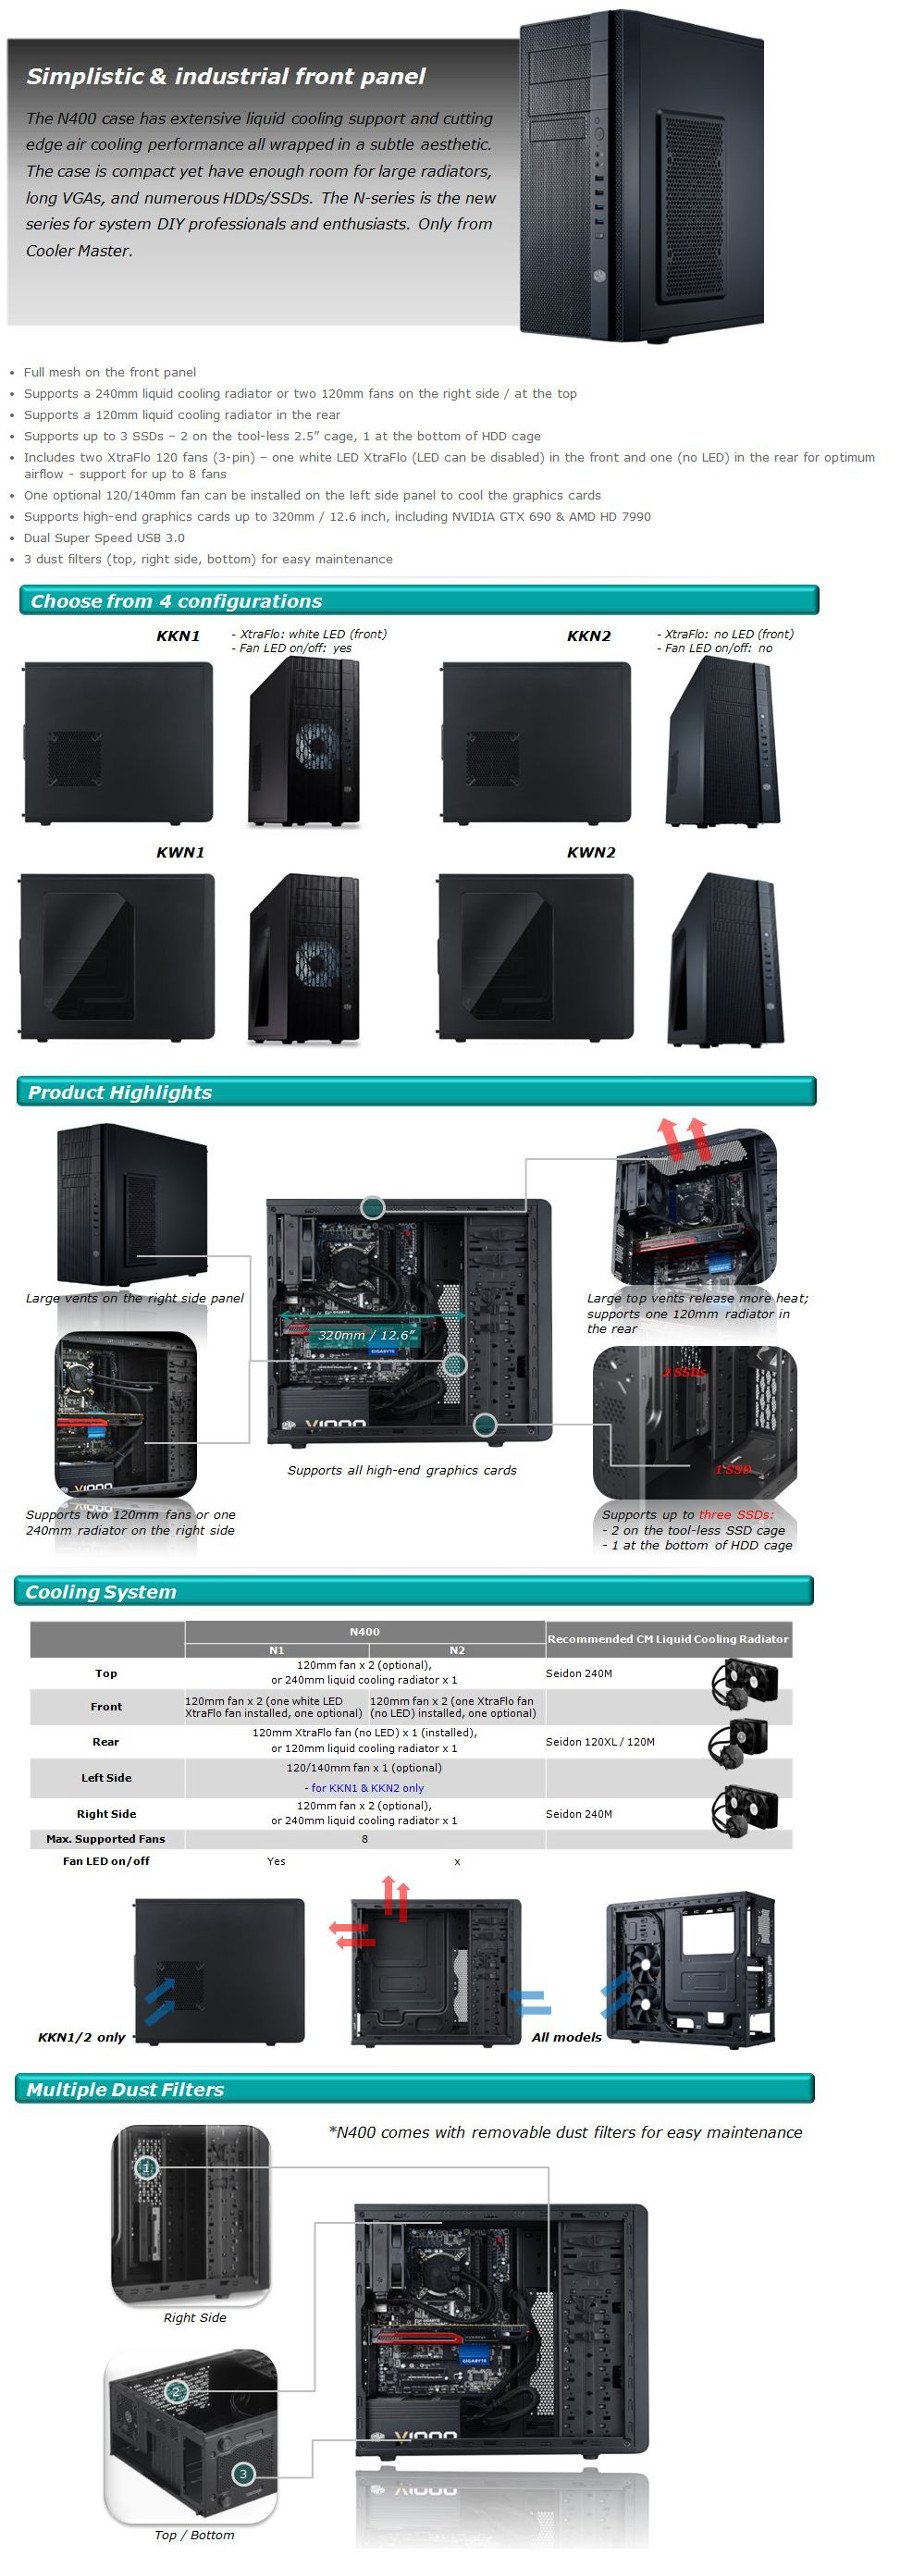 Cooler Master N400 Product Overview